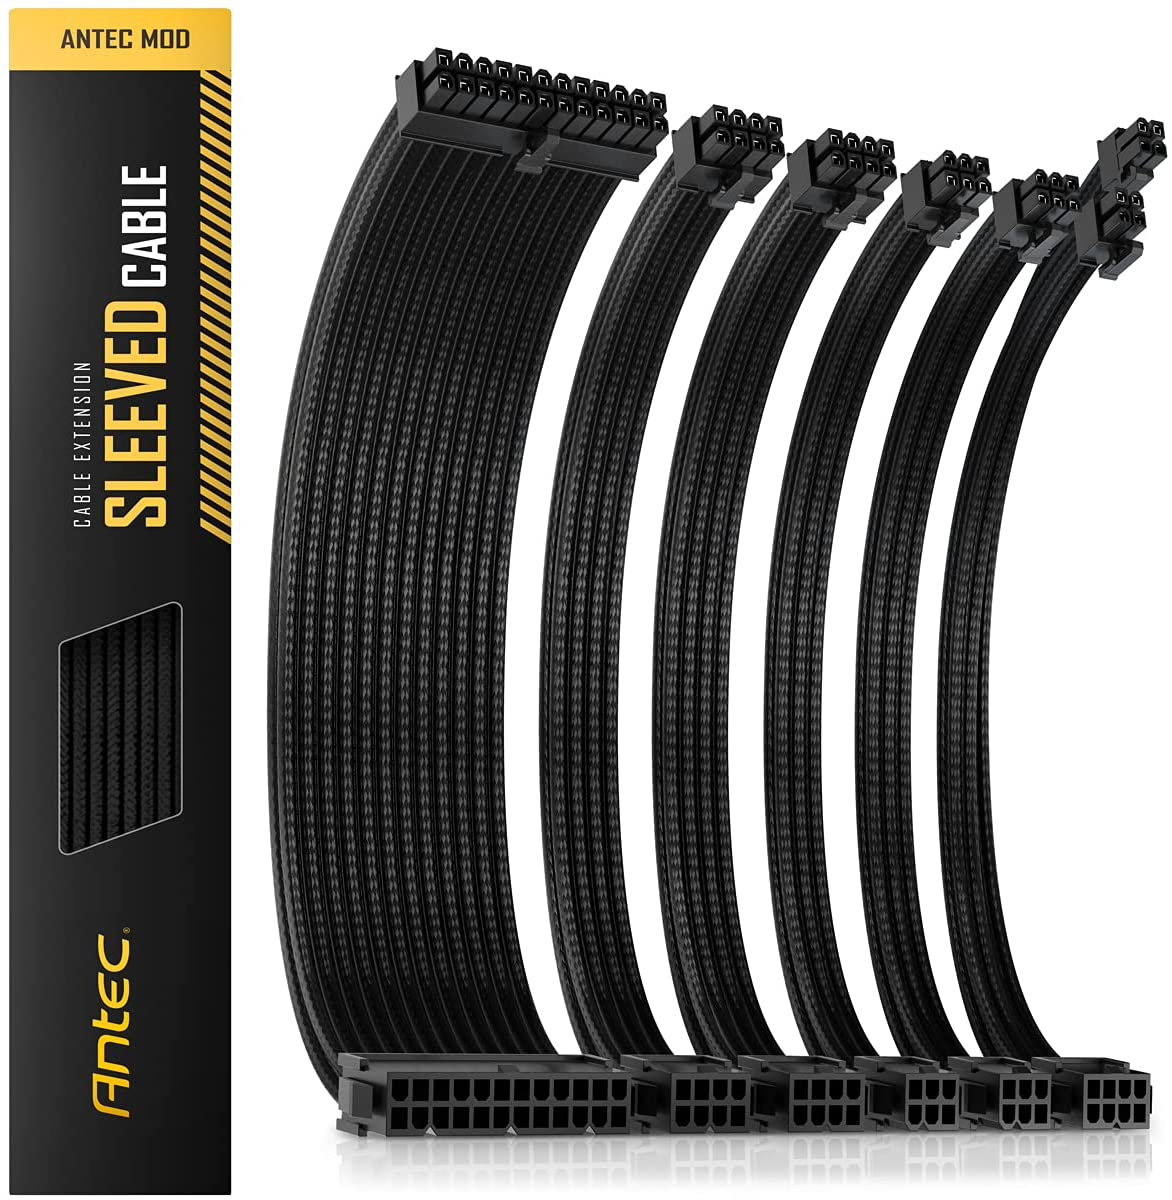 Antec Sleeved Cable - Power Supply Cable Extension Kit with Extra-Sleeved 24 PIN 8PIN 6PIN 4+4 PIN with Combs- Black (11.8Inch/30Cm)